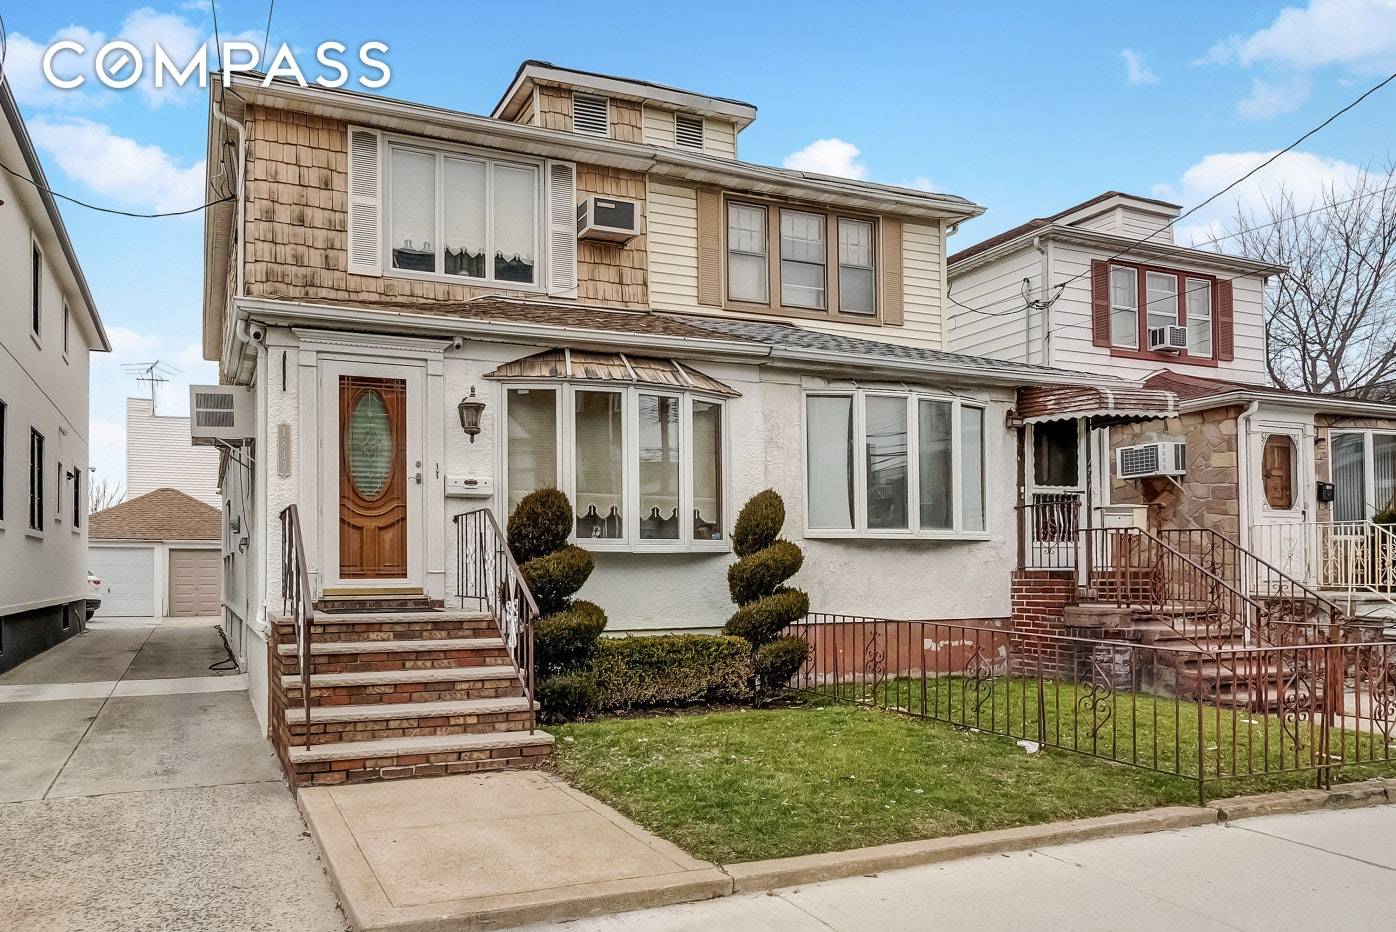 Ideally located on Avenue V between East 18th and East 19th Street this semi detached single family home is ready for its new owner to make it into their own.